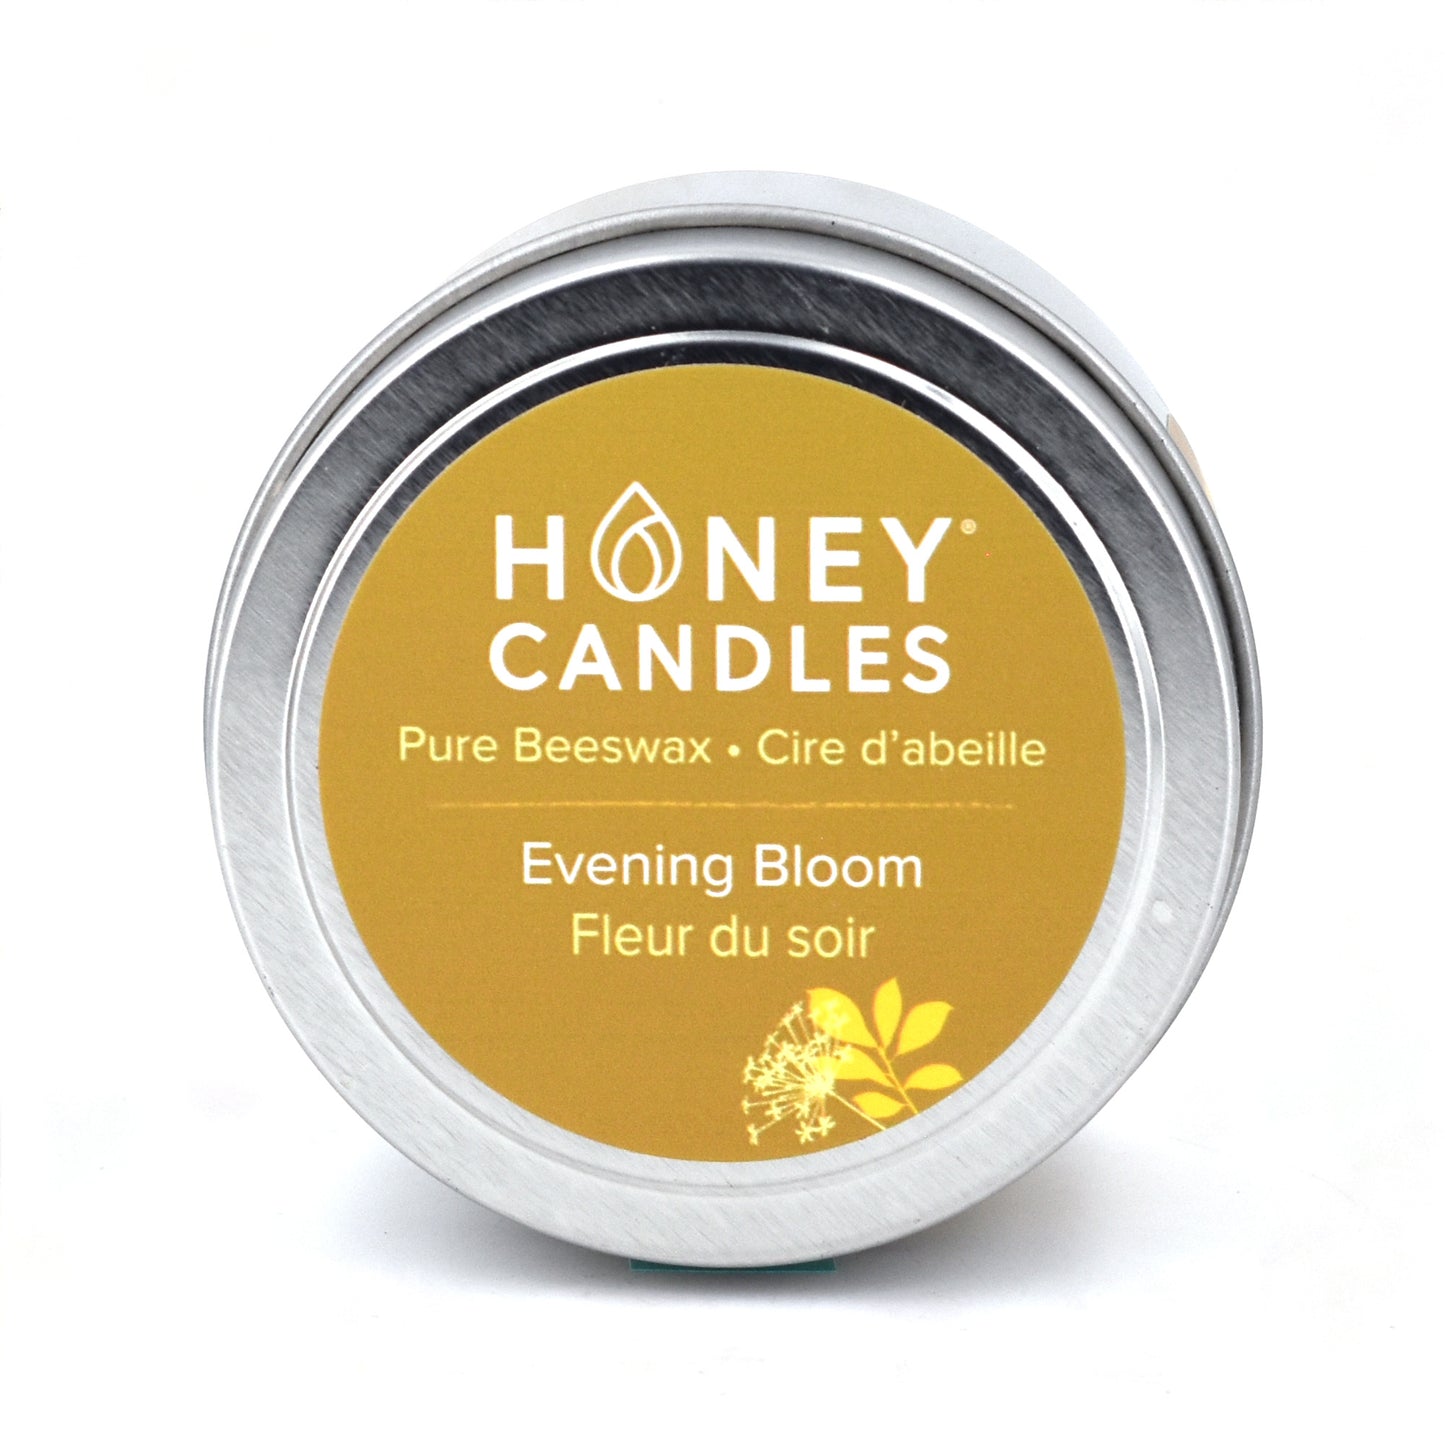 Evening Bloom Beeswax Candle Tin